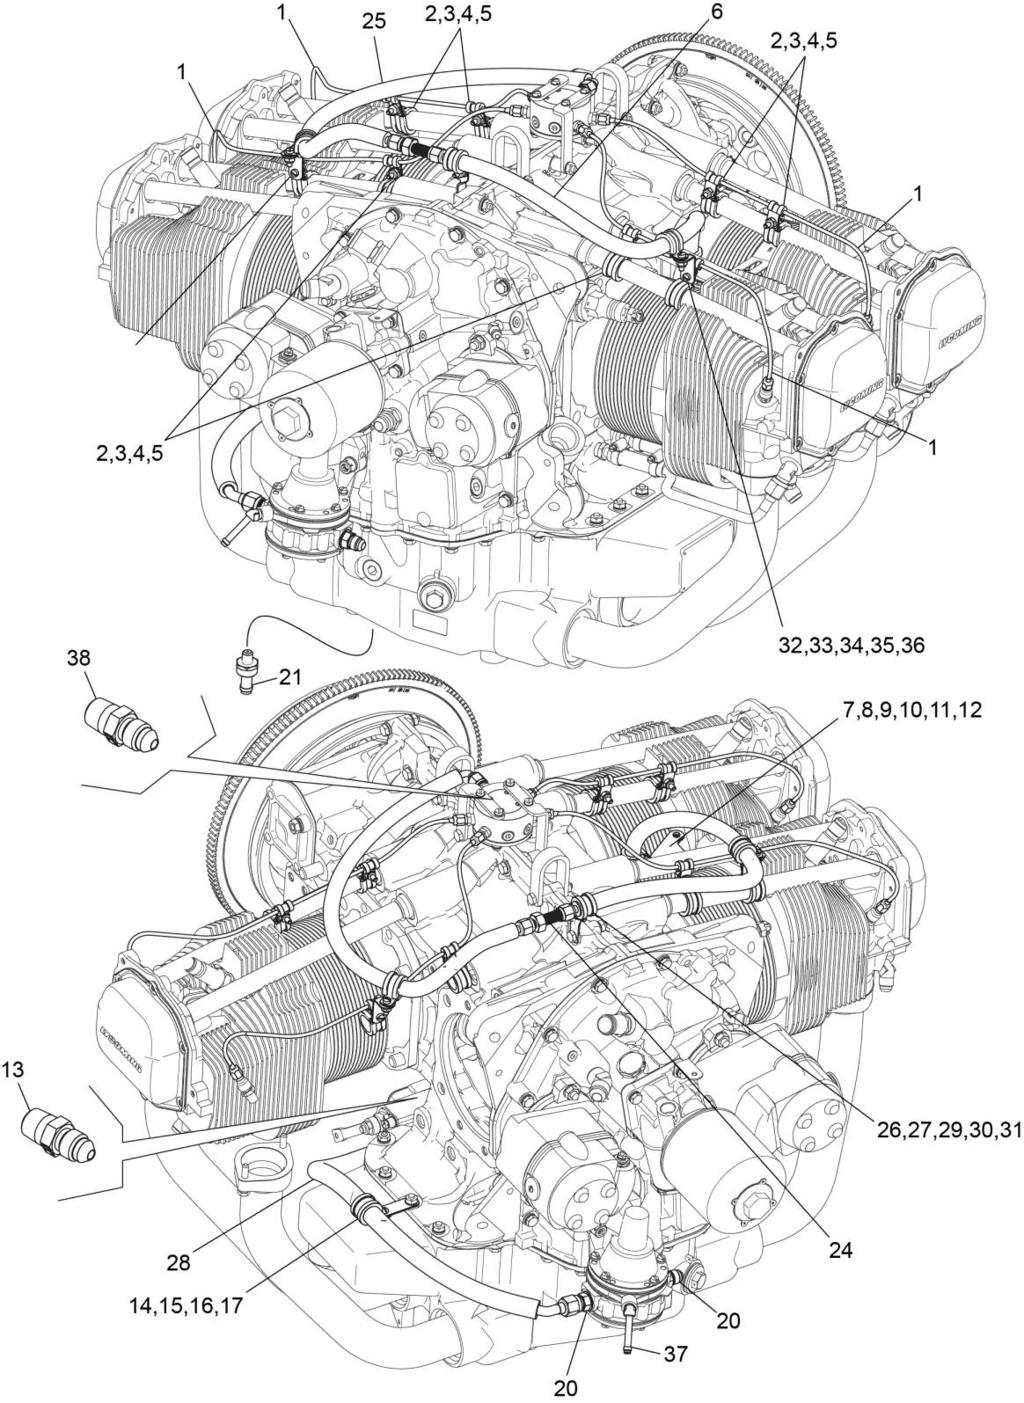 Figure 21 Fuel Lines and Attaching Parts Effectivity: (L)IO--M1A Engine